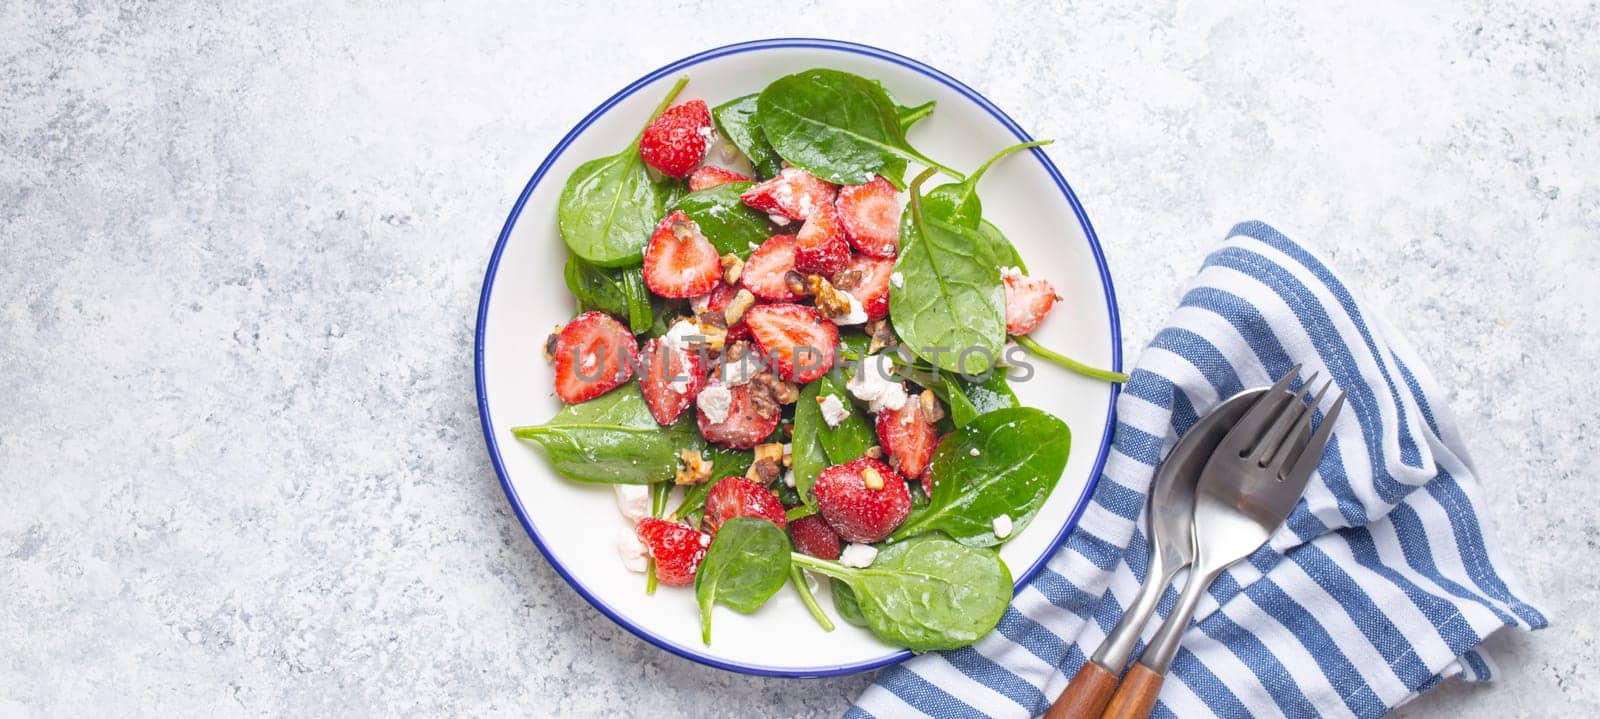 Light Healthy Summer Salad with fresh Strawberries, Spinach, Cream Cheese and Walnuts on White Ceramic Plate, white rustic stone Background Top View.